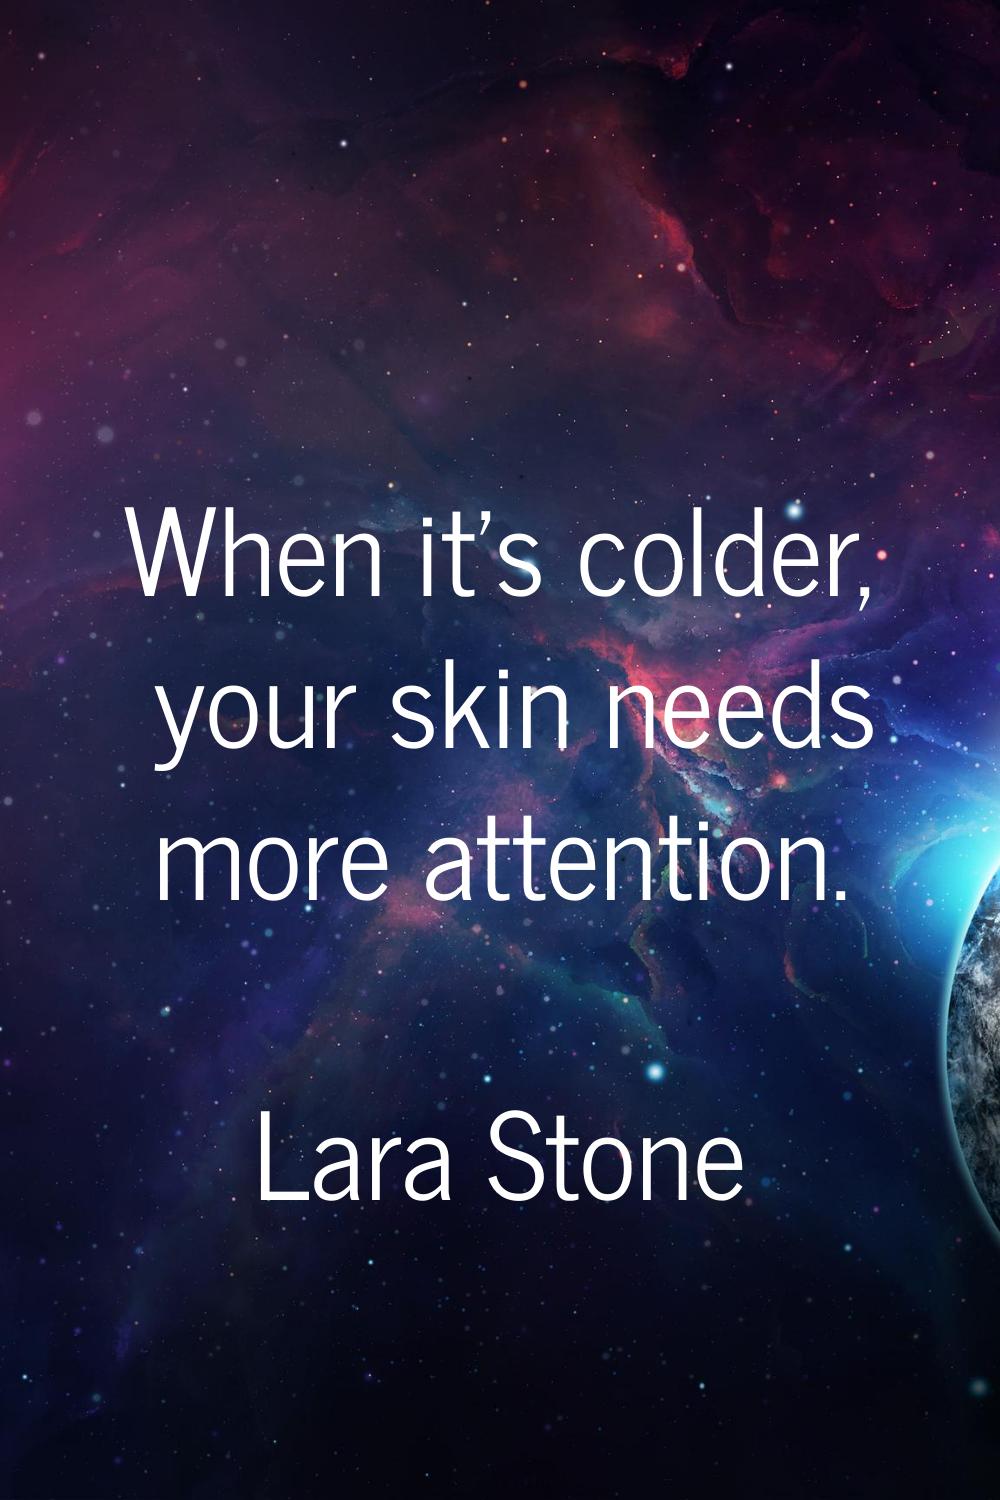 When it's colder, your skin needs more attention.